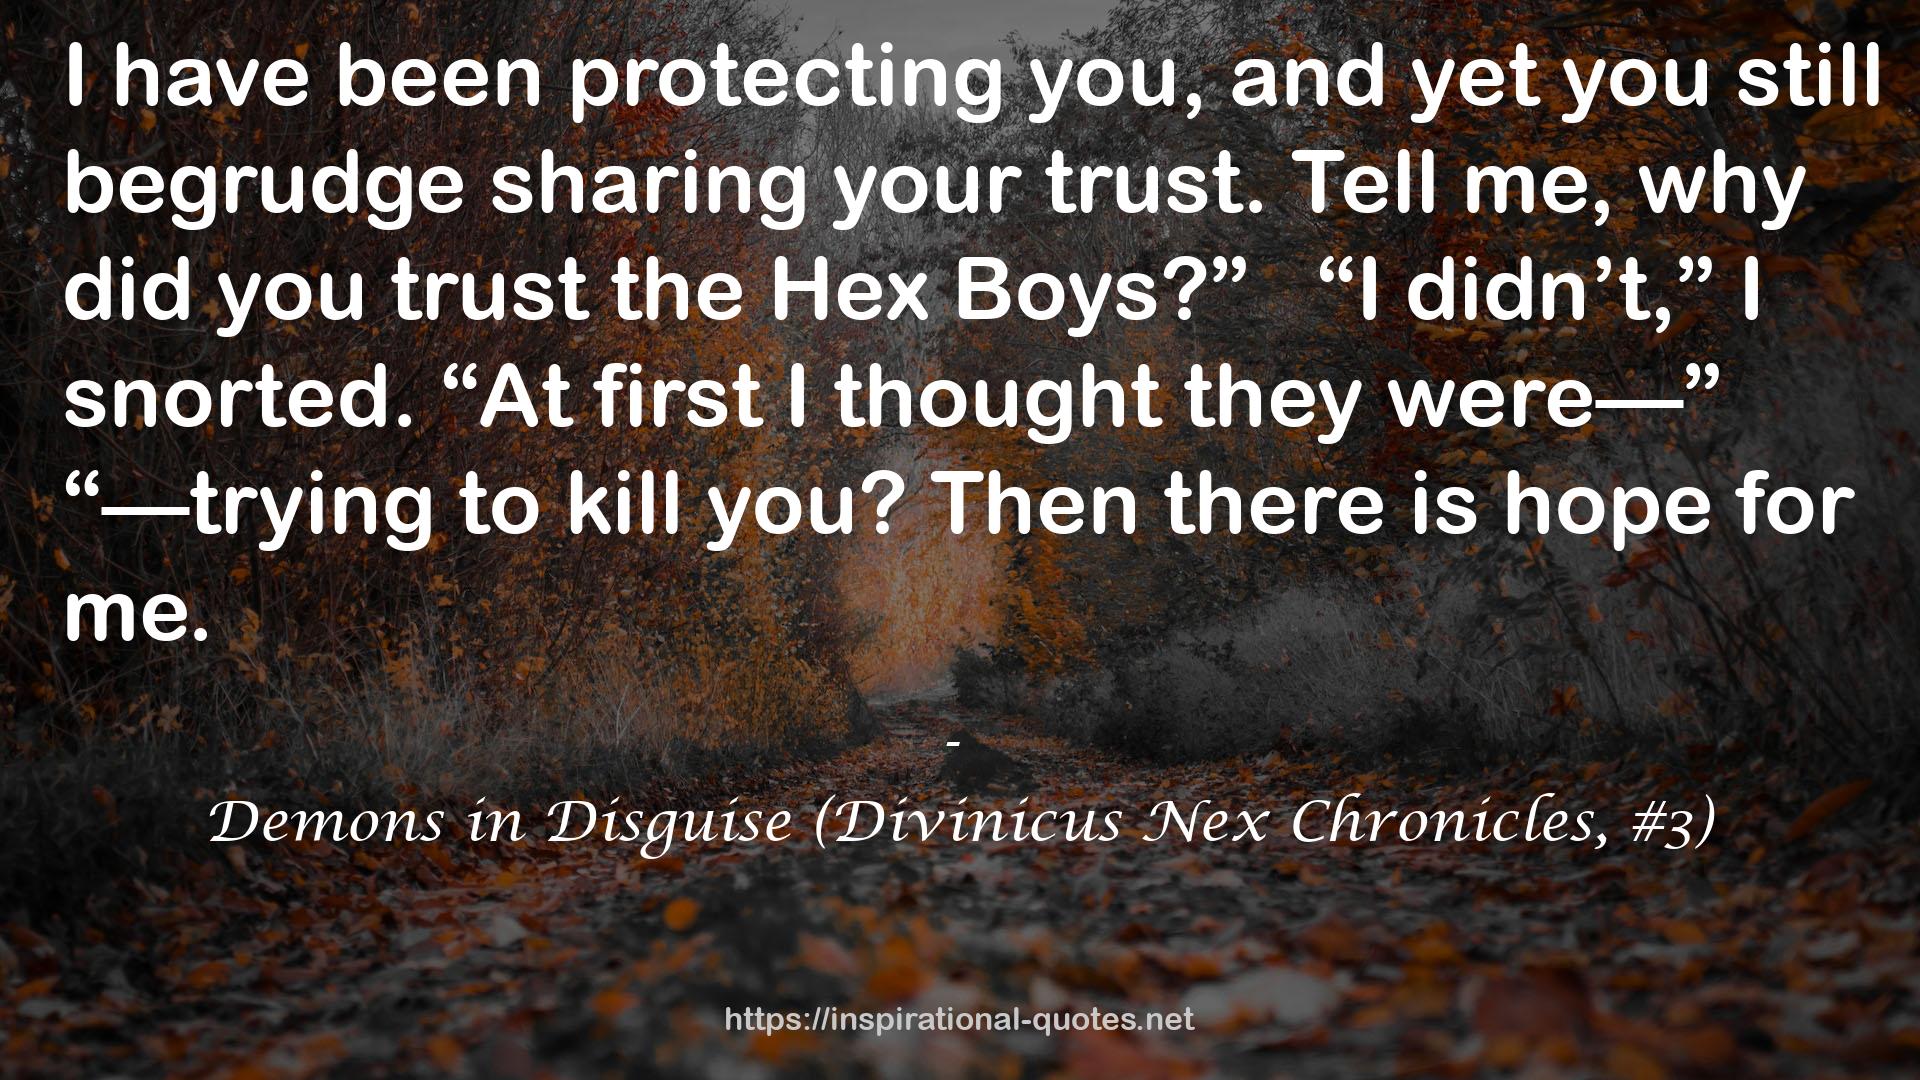 Demons in Disguise (Divinicus Nex Chronicles, #3) QUOTES